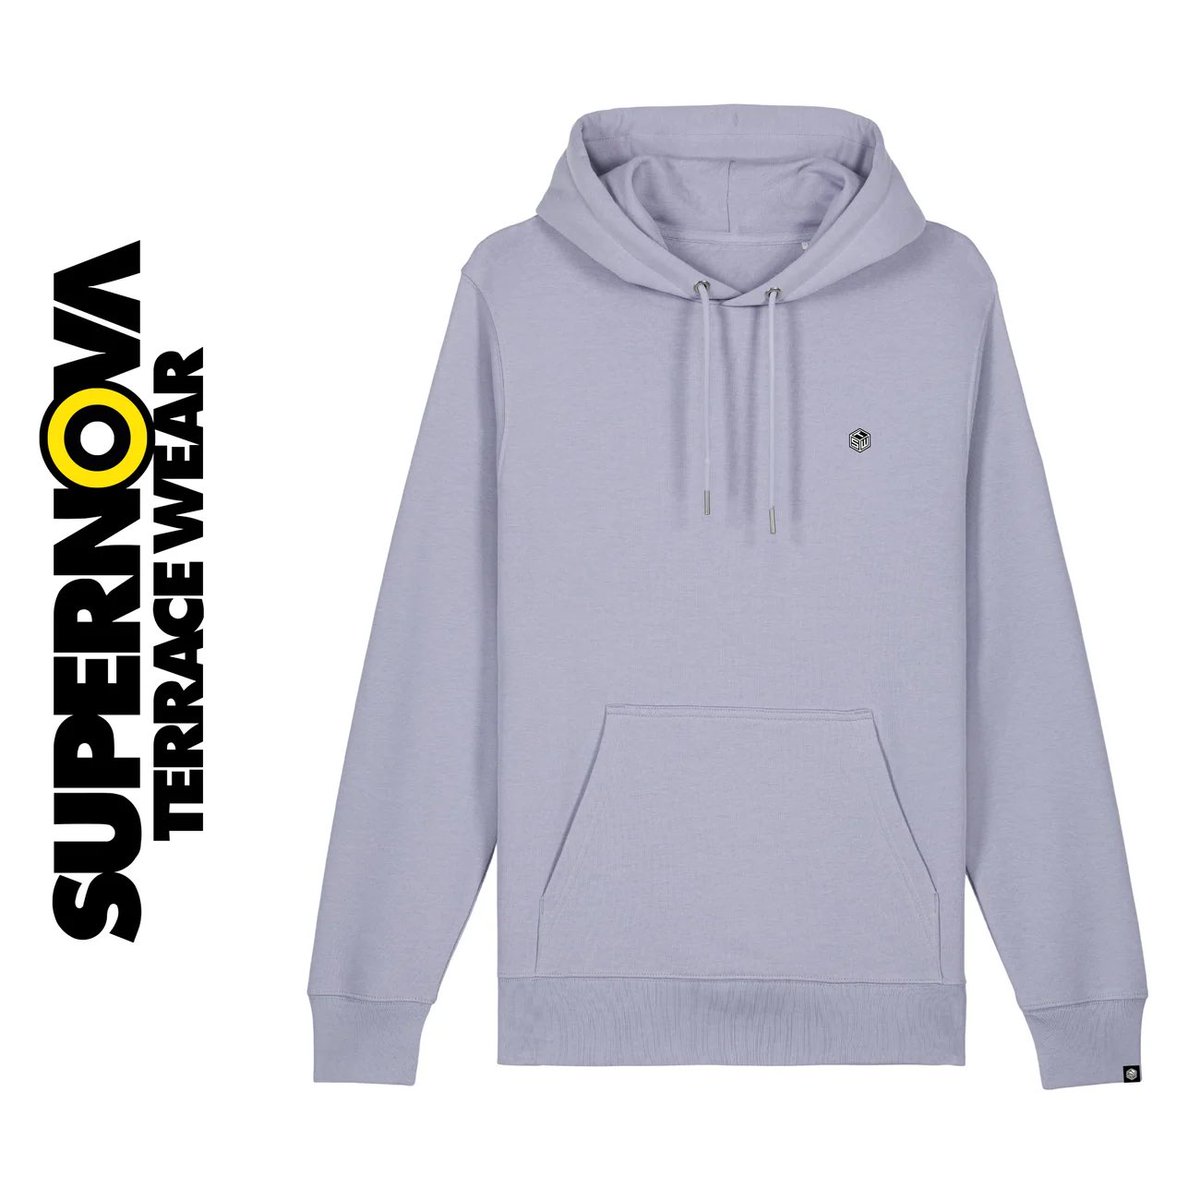 NEW for SS24 Our new mid-lightweight Unisex hoodie is available in 4x colours in sizes XS - 3XL. Order yours now @ supernovaterracewear.com Shop Smart. Shop Indie. ✌️😎 #stw #terracewear #leisurewear